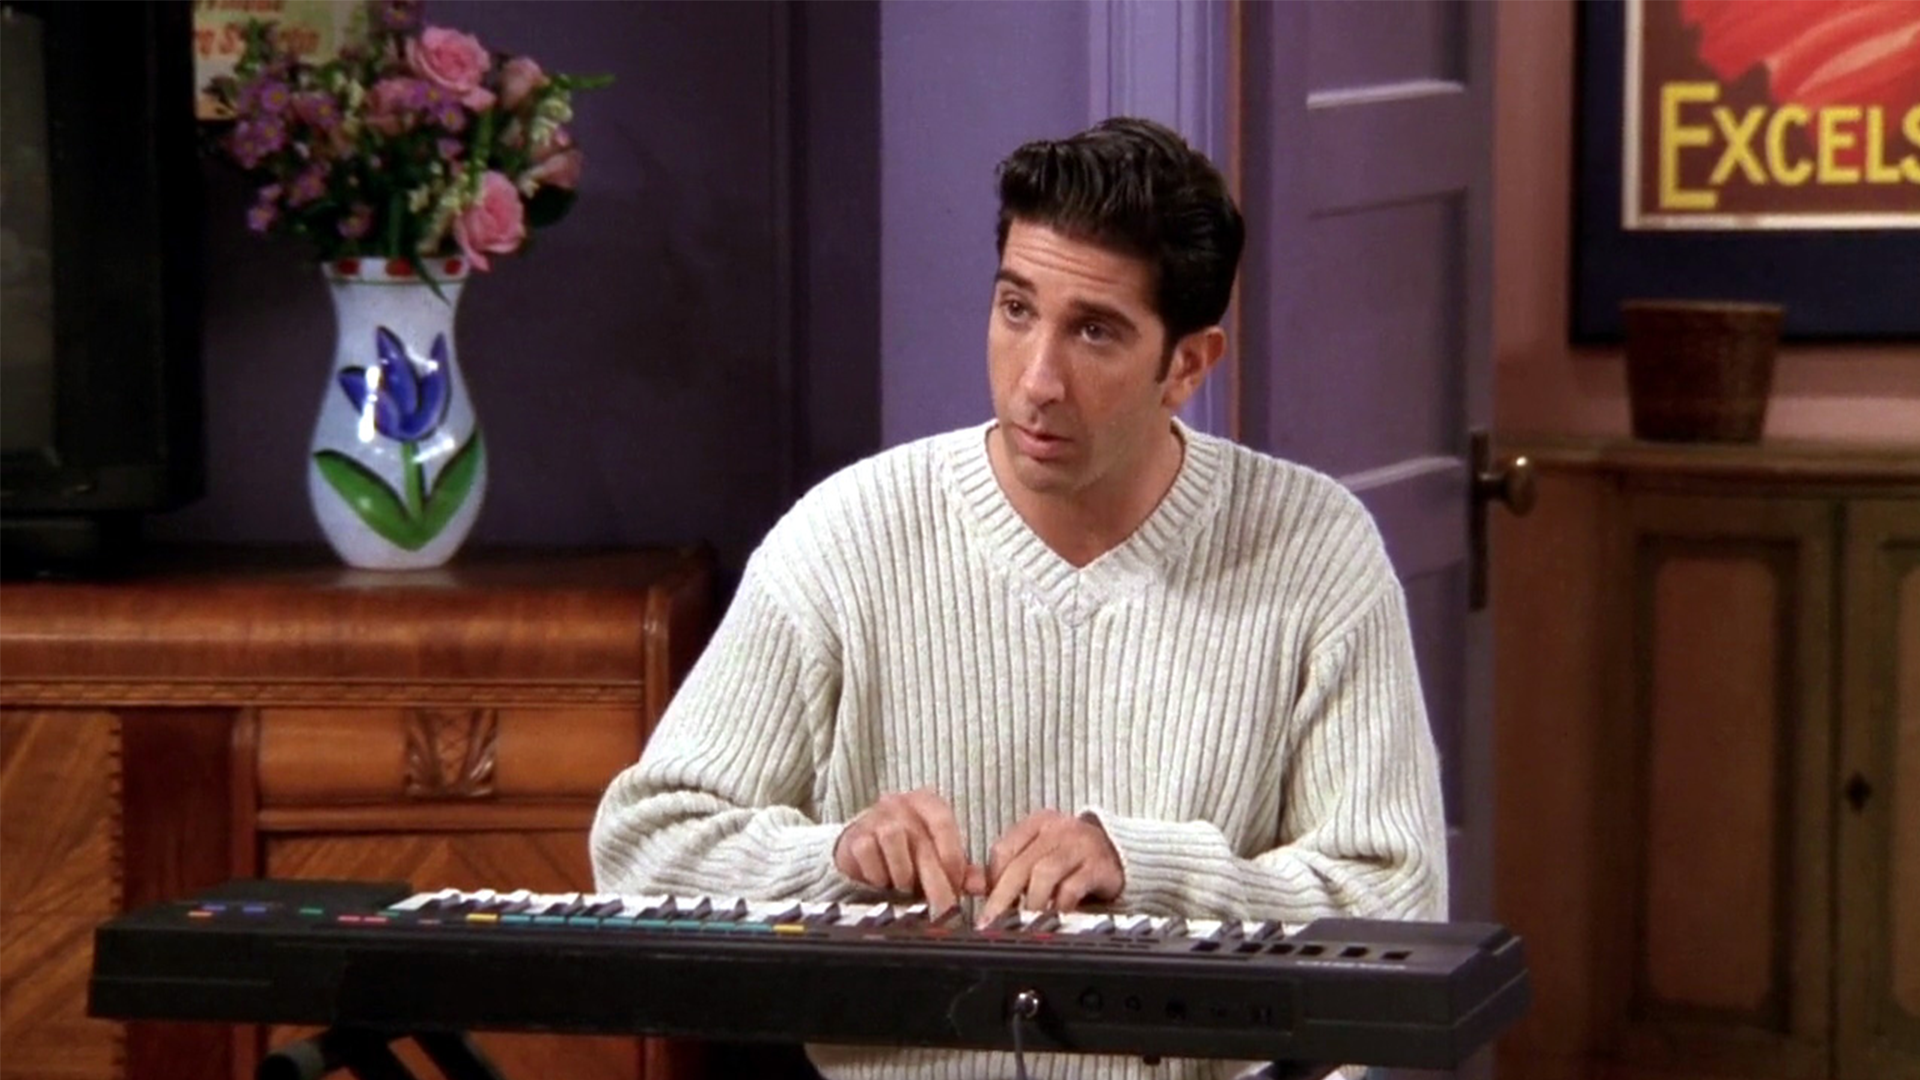 Ross playing an instrument in season 4 of Friends